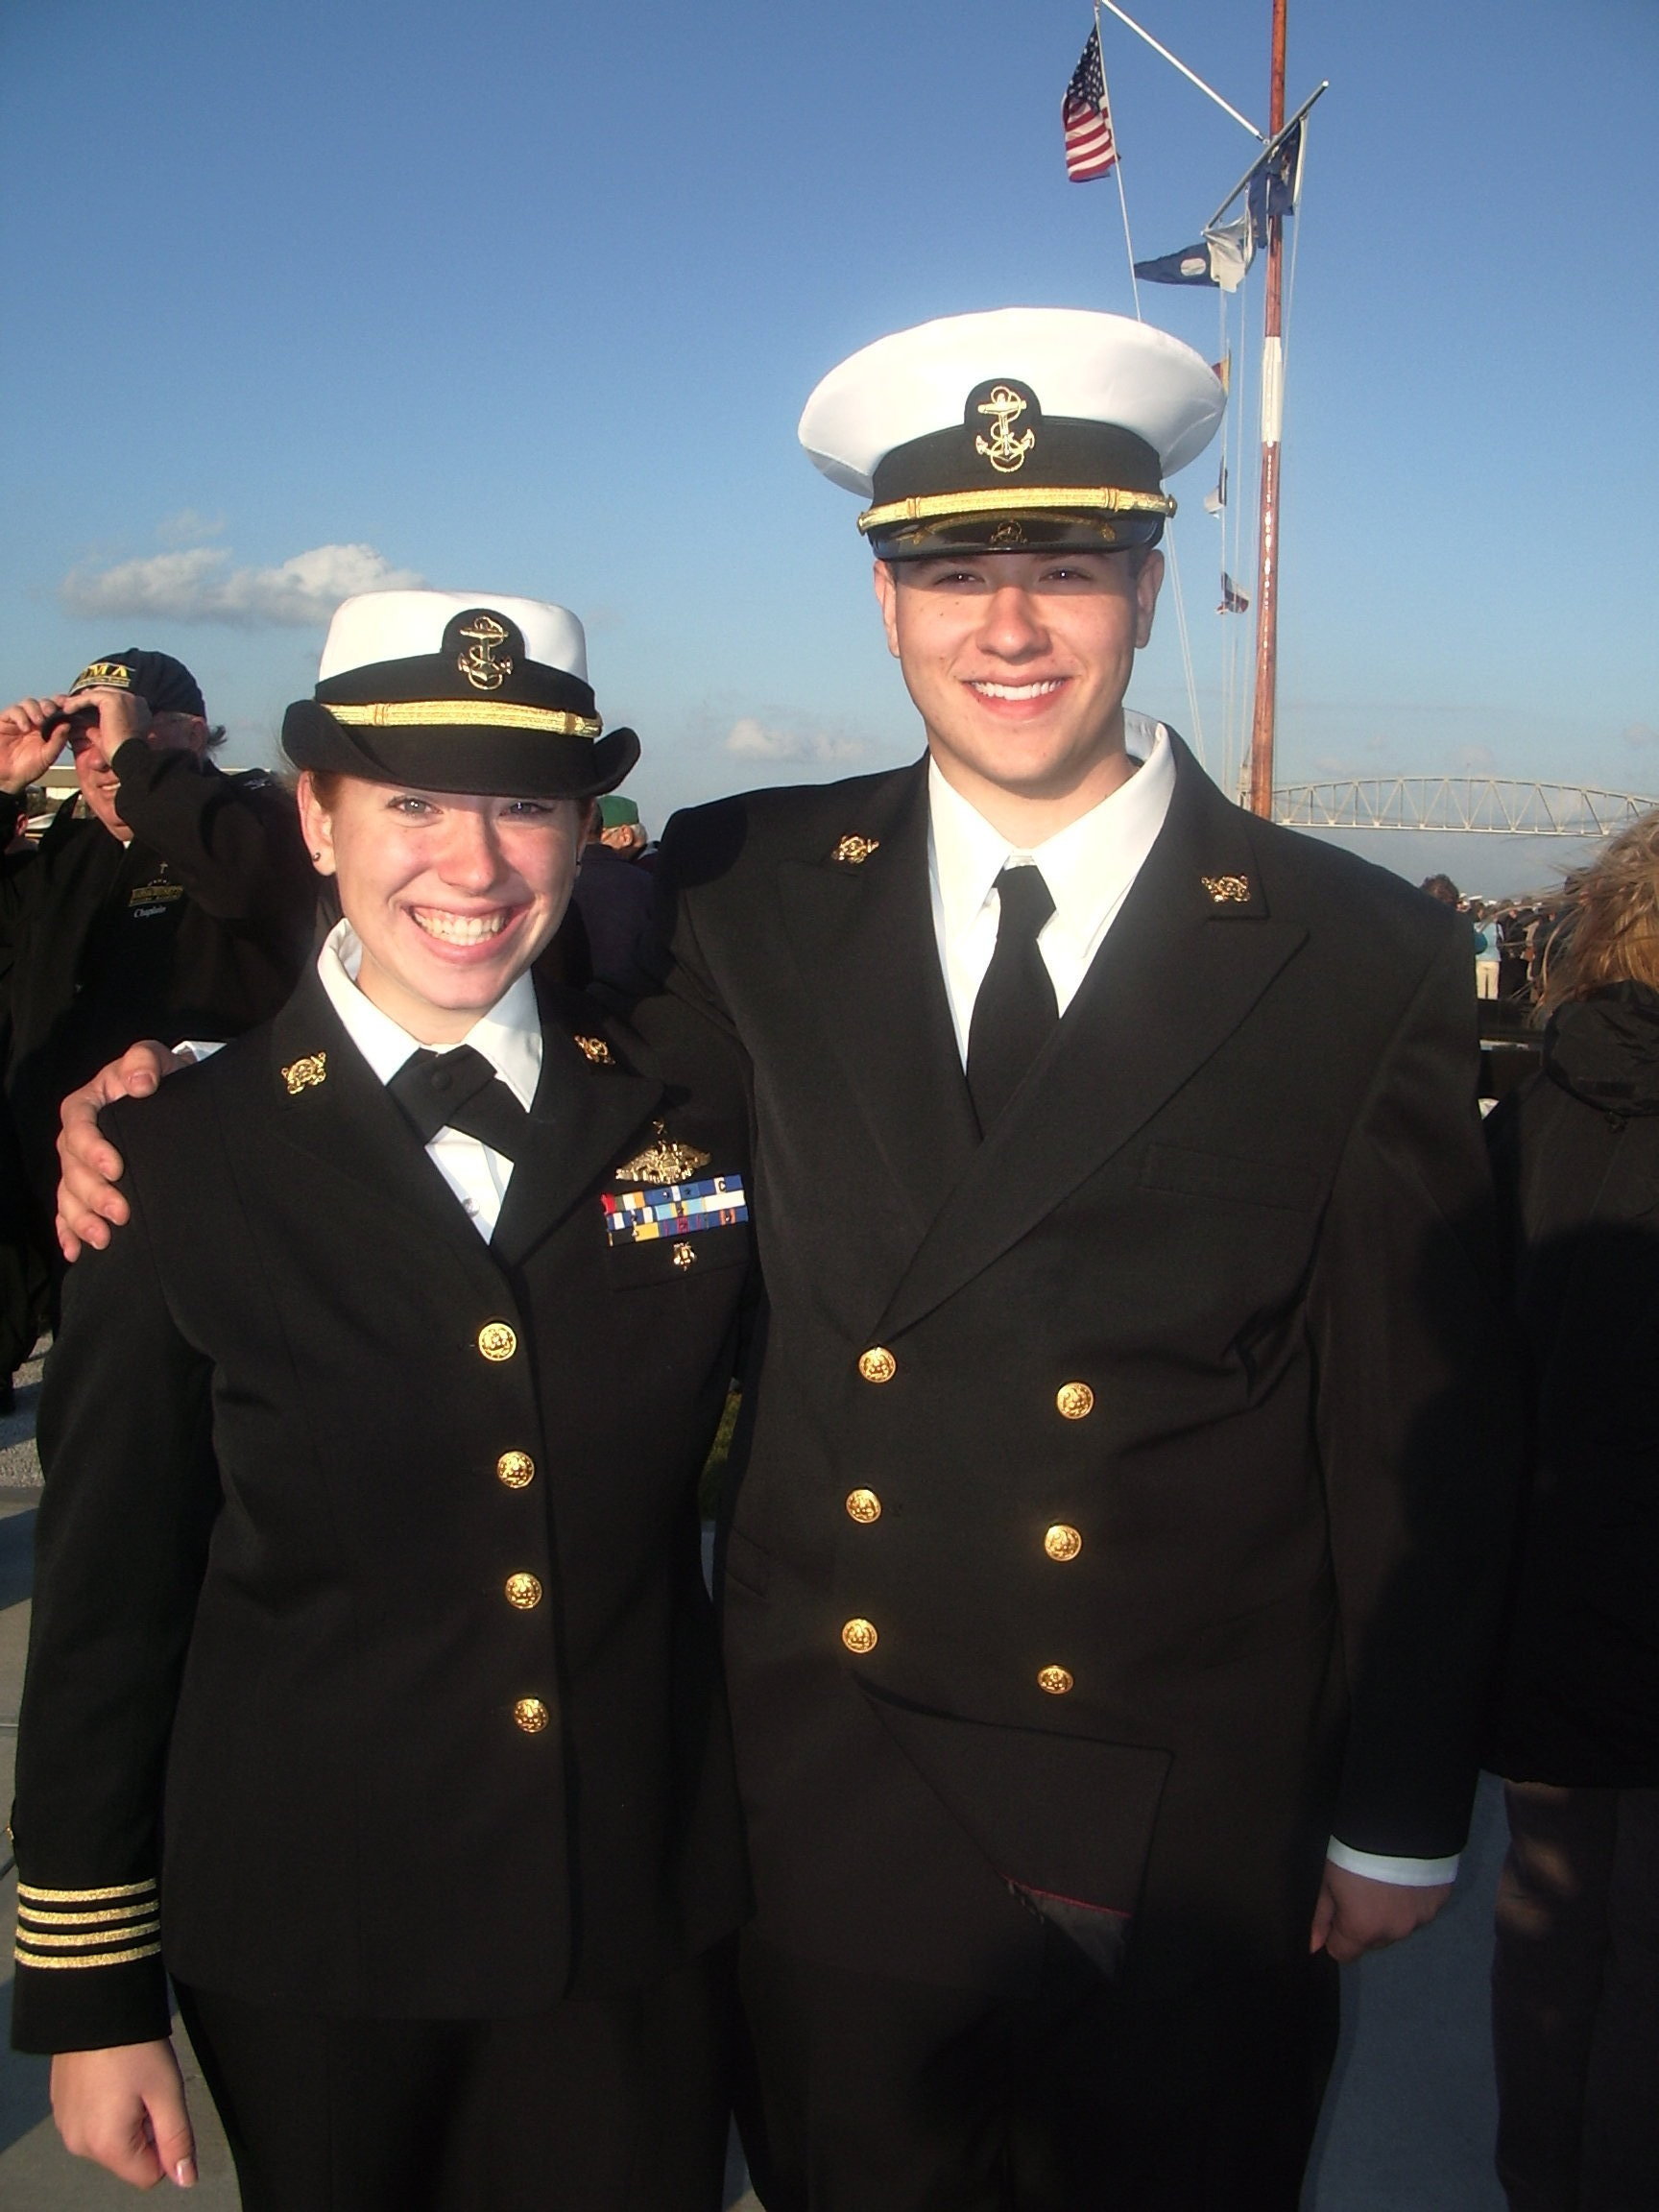 My brother Joe and me during his recognition ceremony